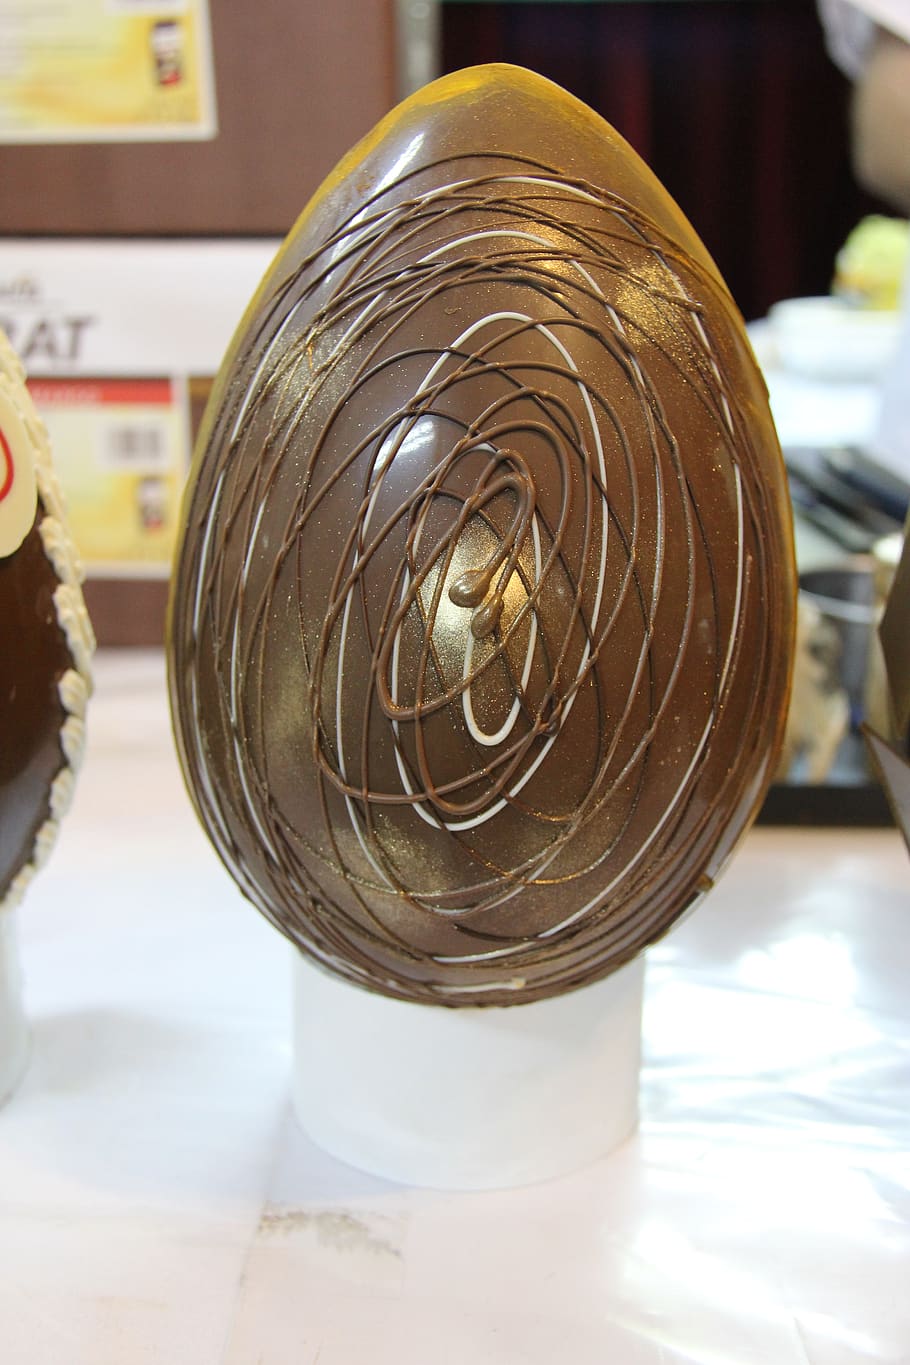 chocolate, egg, easter, focus on foreground, indoors, close-up, table, spiral, still life, metal